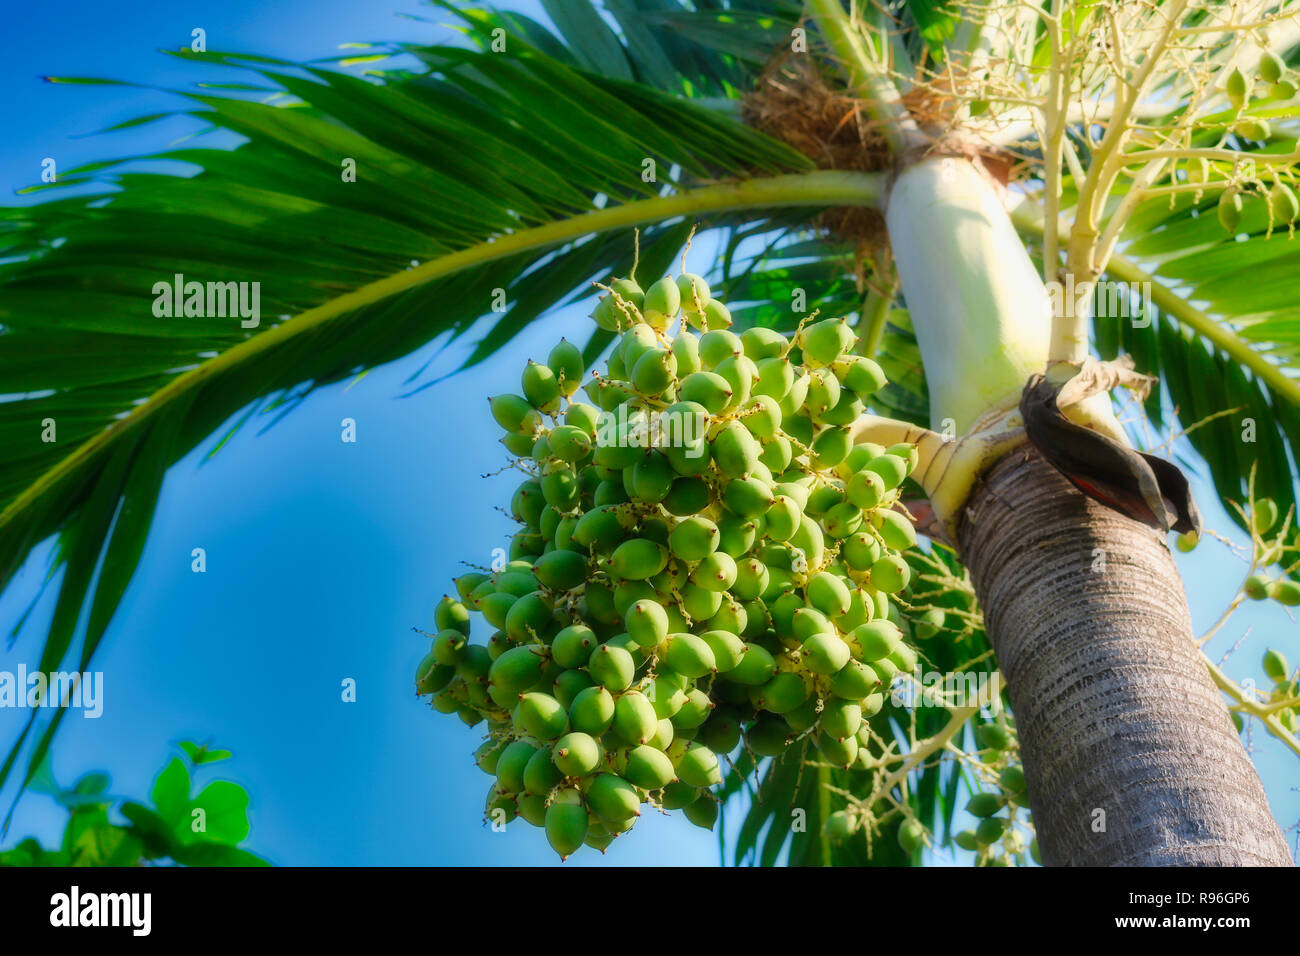 This great nature photo shows a palm tree from below and its fruit growing out of it. The photo was taken in Hua Hin in Thailand Stock Photo